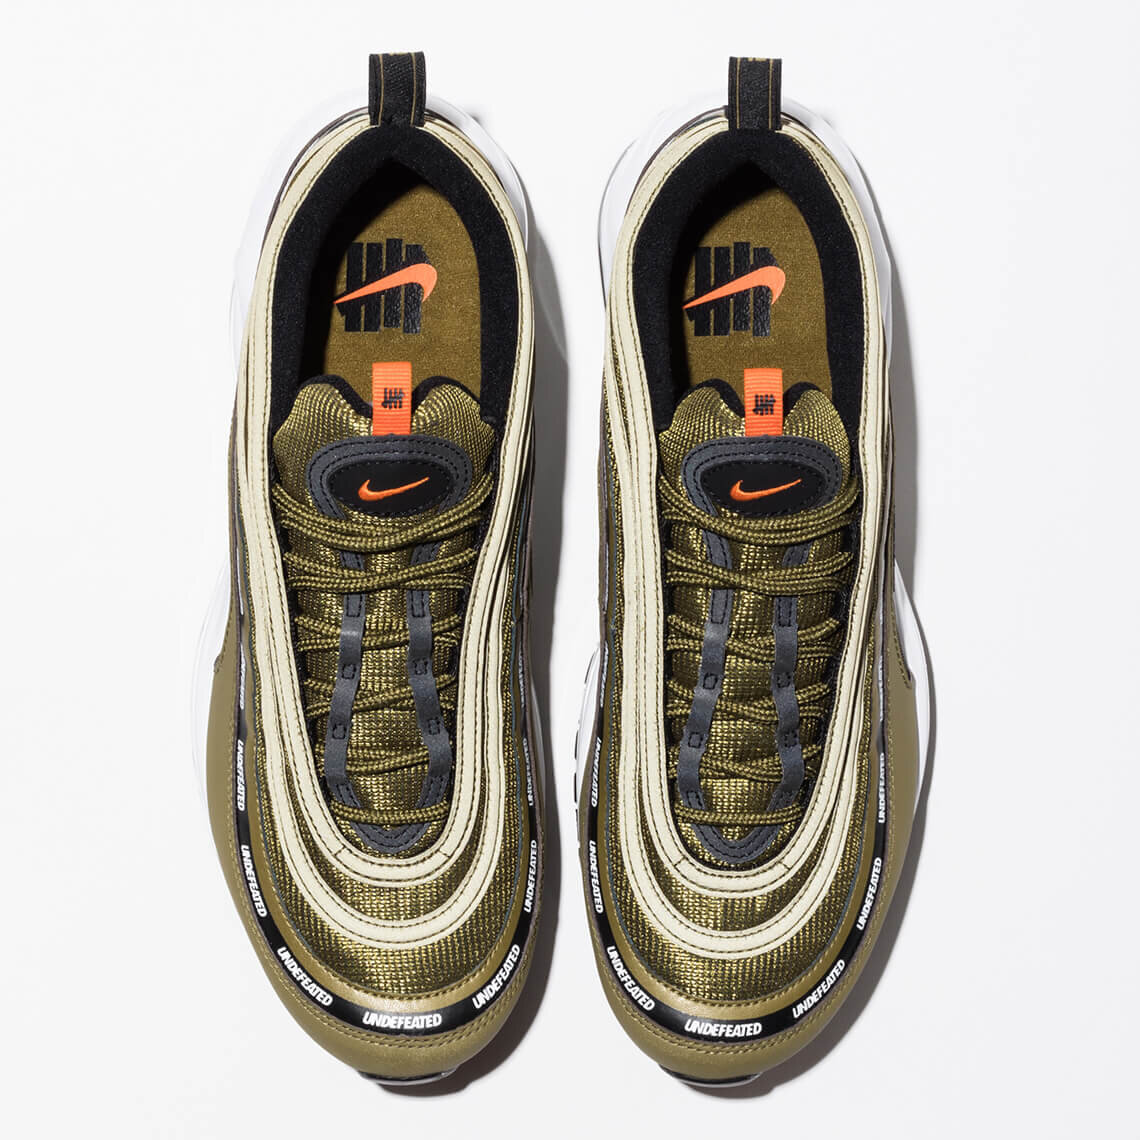 CNK-undefeated-nike-air-max-97-2020-militia-green-insole.jpg